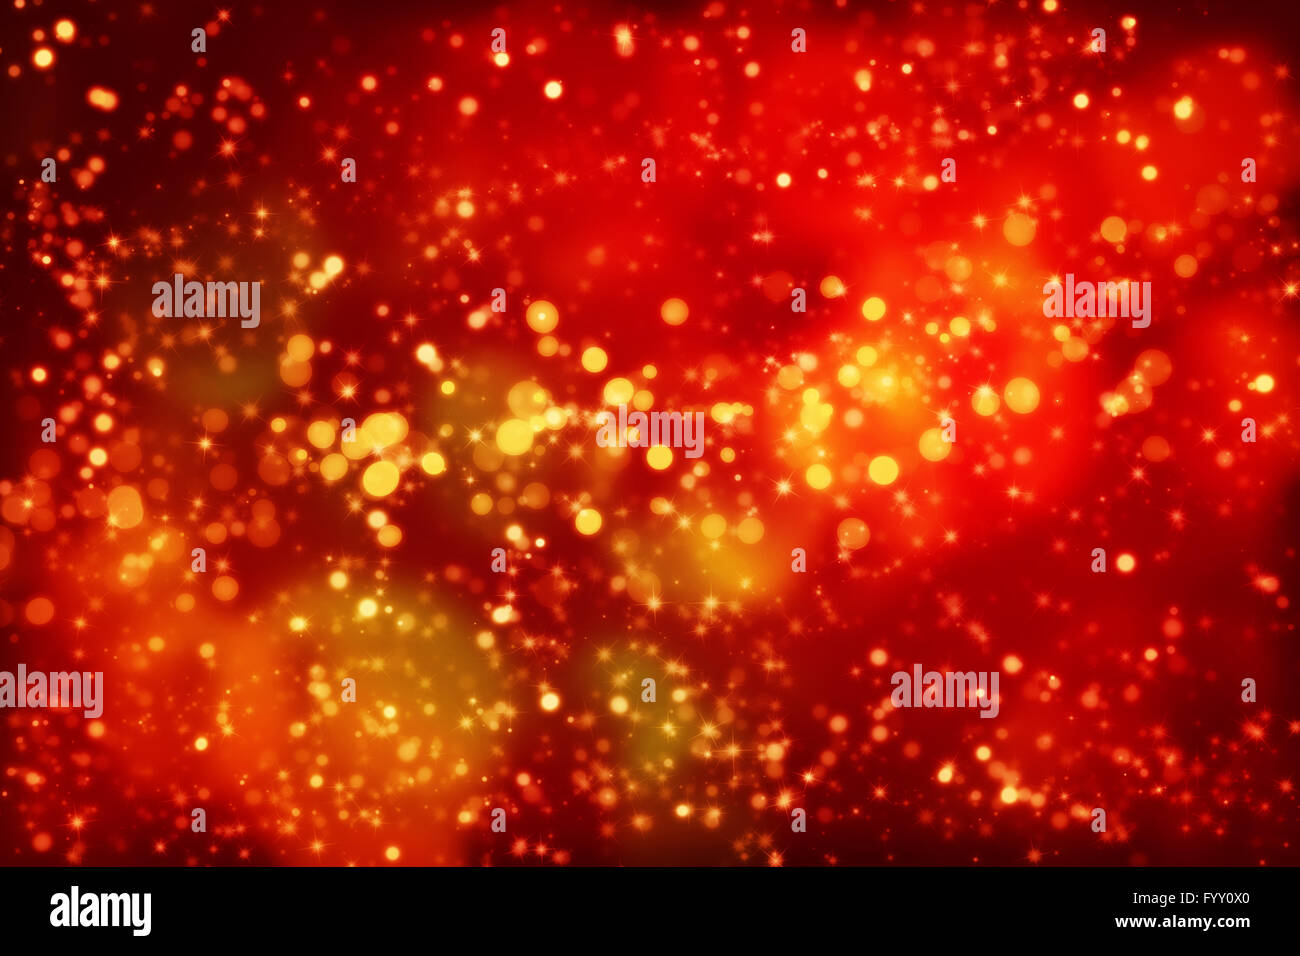 Red Christmas abstract background with lights Stock Photo